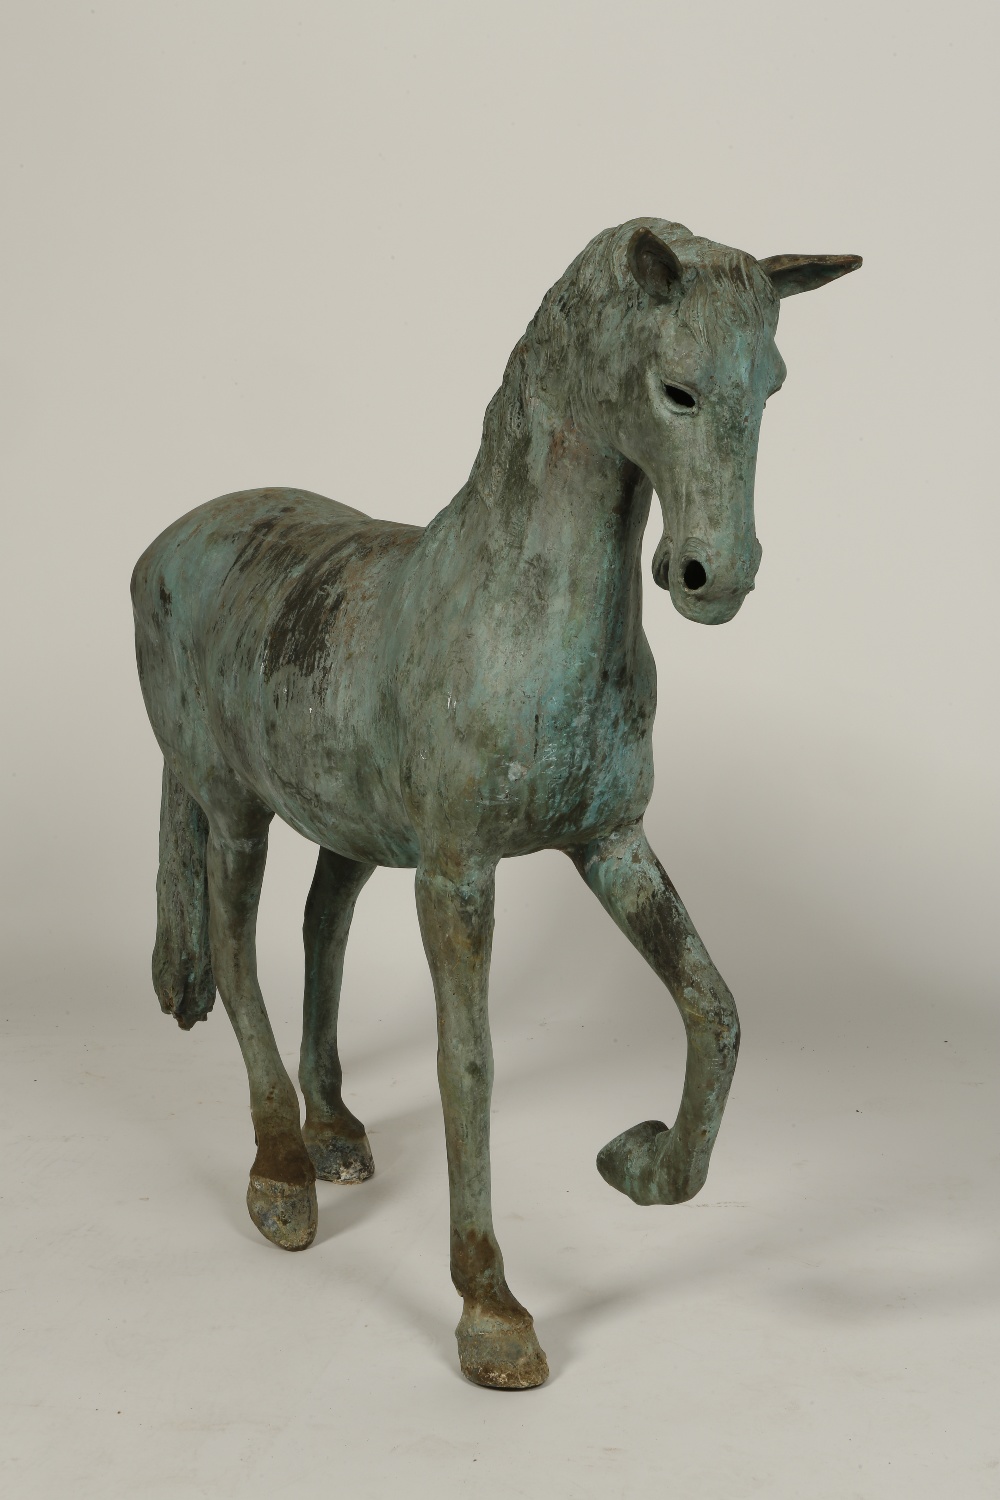 A CAST BRONZE STATUE OF A PRANCING HORSE with all over green patination, 36" high